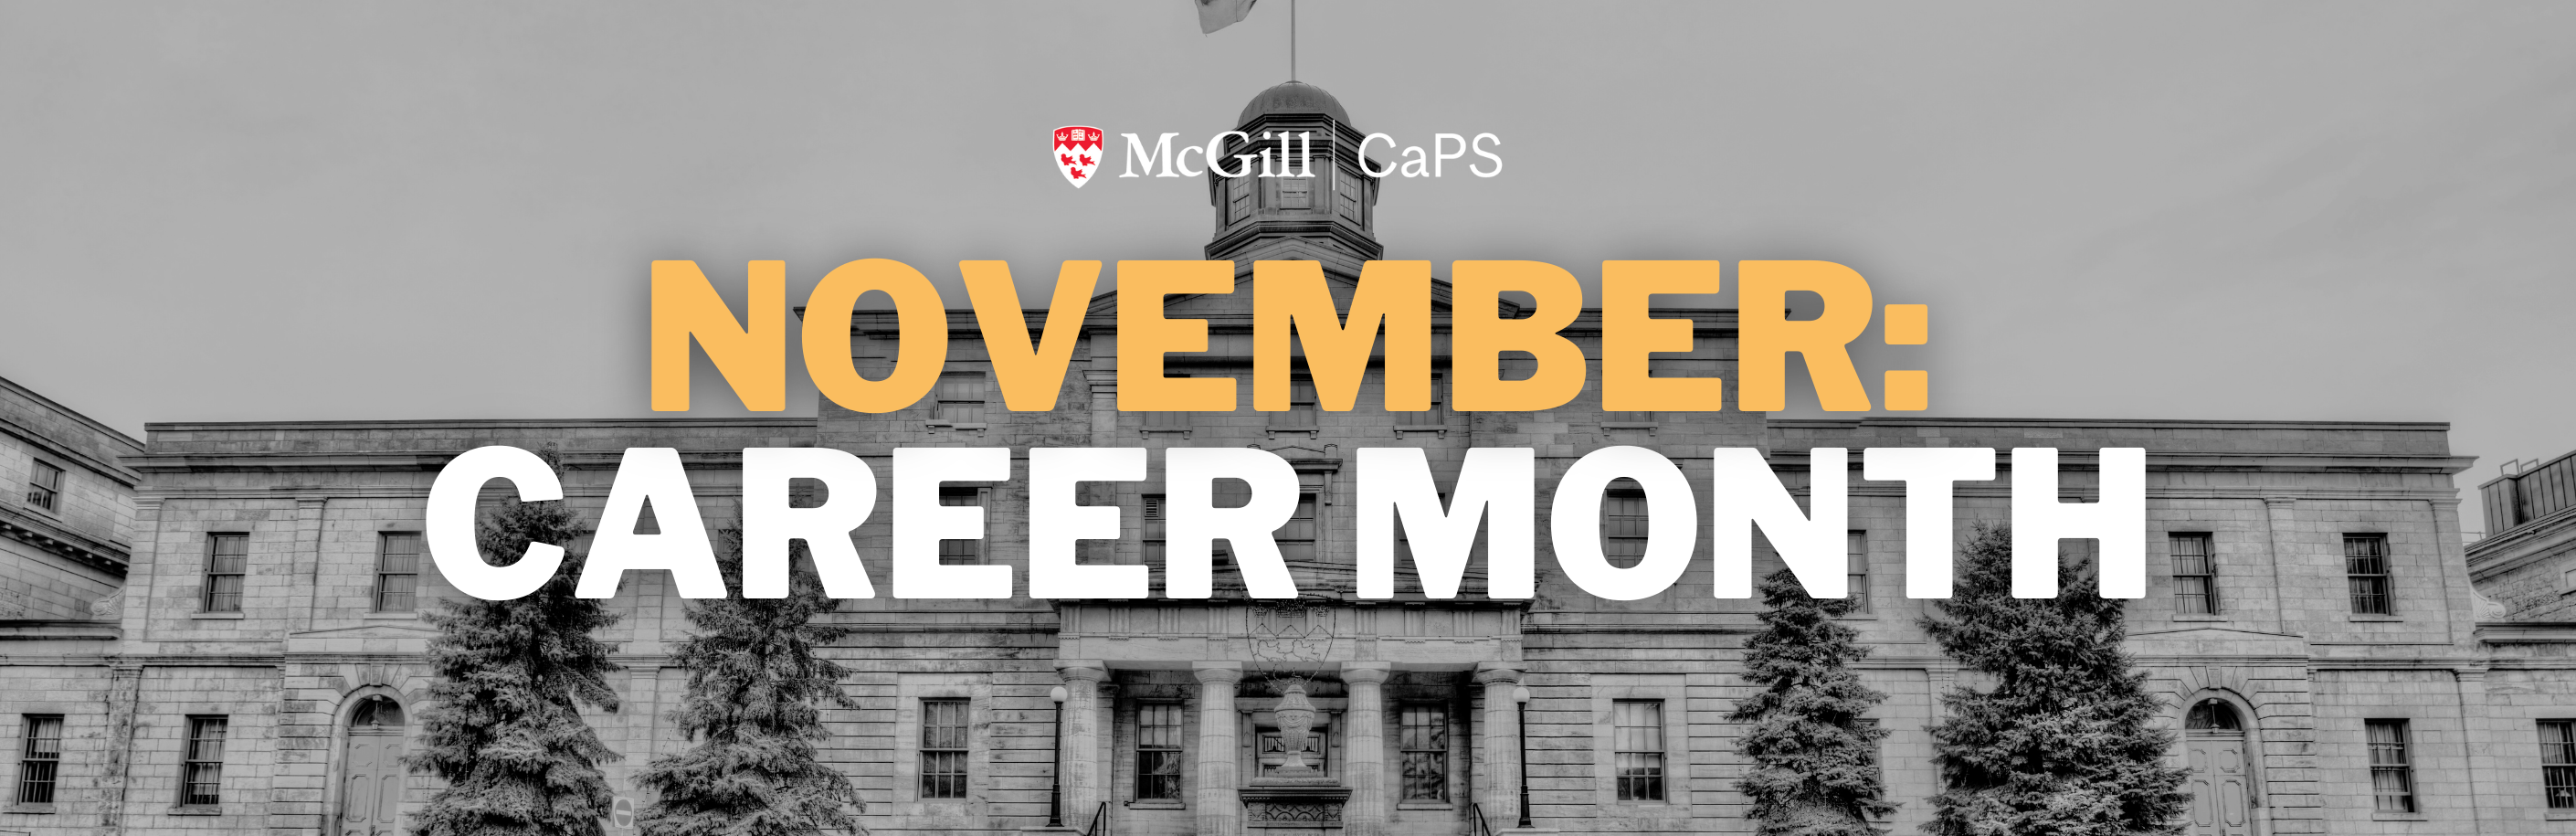 November Career Month title over an image of the McGill Arts Building.